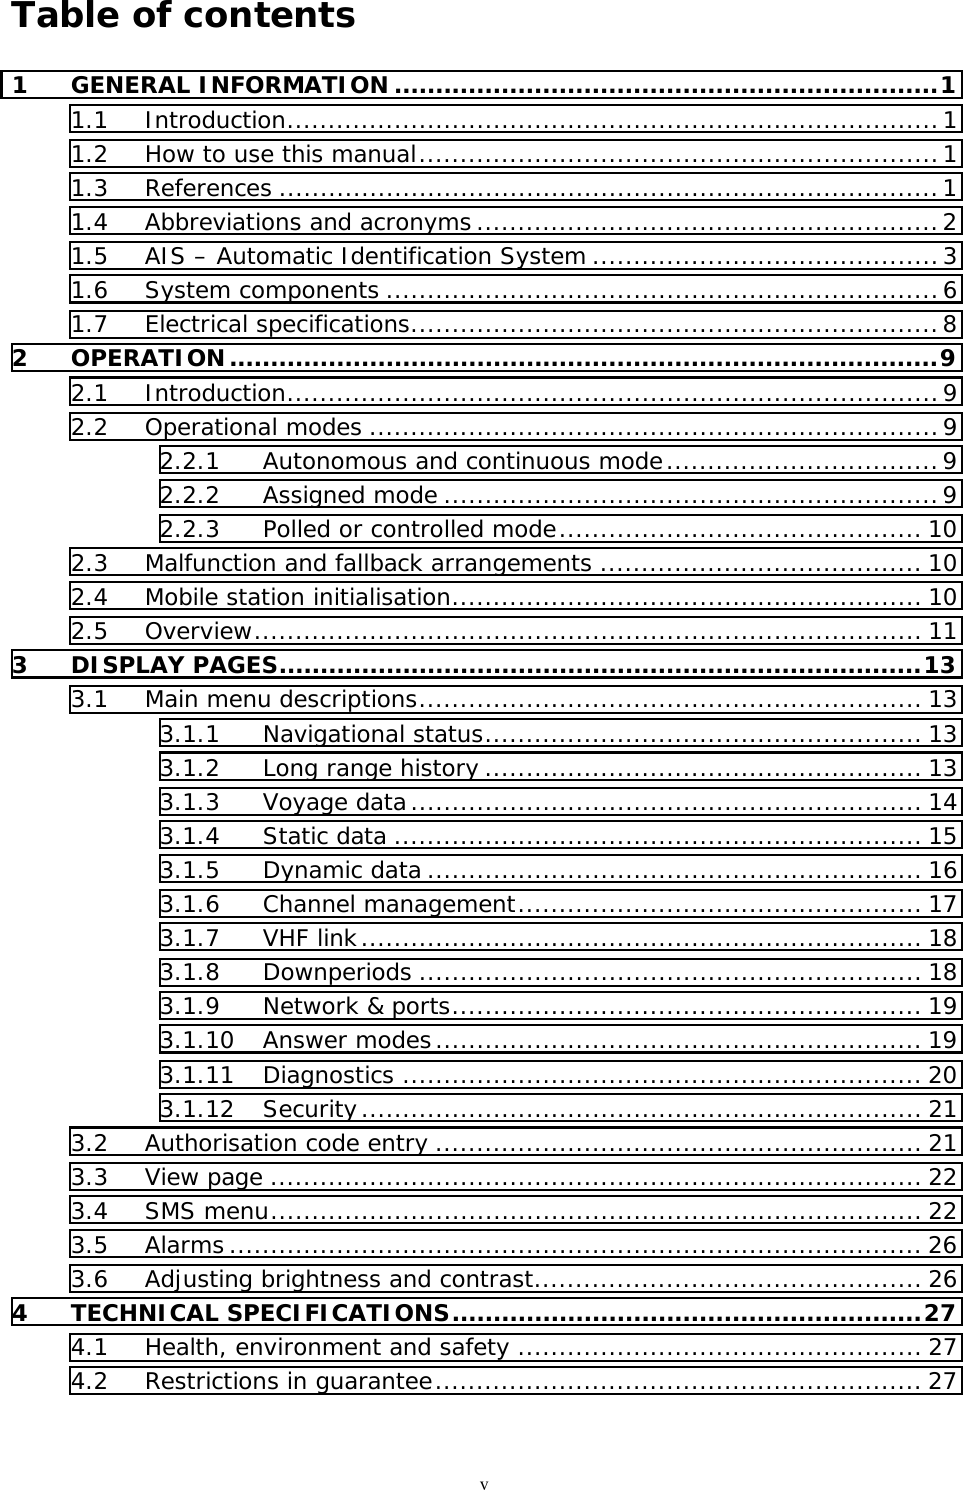 vTable of contents1 GENERAL INFORMATION ..................................................................11.1 Introduction...............................................................................11.2 How to use this manual...............................................................11.3 References ................................................................................11.4 Abbreviations and acronyms ........................................................21.5 AIS – Automatic Identification System ..........................................31.6 System components ...................................................................61.7 Electrical specifications................................................................82 OPERATION......................................................................................92.1 Introduction...............................................................................92.2 Operational modes .....................................................................92.2.1 Autonomous and continuous mode.................................92.2.2 Assigned mode ............................................................92.2.3 Polled or controlled mode............................................ 102.3 Malfunction and fallback arrangements ....................................... 102.4 Mobile station initialisation......................................................... 102.5 Overview................................................................................. 113 DISPLAY PAGES..............................................................................133.1 Main menu descriptions............................................................. 133.1.1 Navigational status..................................................... 133.1.2 Long range history ..................................................... 133.1.3 Voyage data.............................................................. 143.1.4 Static data ................................................................ 153.1.5 Dynamic data ............................................................ 163.1.6 Channel management................................................. 173.1.7 VHF link.................................................................... 183.1.8 Downperiods ............................................................. 183.1.9 Network &amp; ports......................................................... 193.1.10 Answer modes........................................................... 193.1.11 Diagnostics ............................................................... 203.1.12 Security.................................................................... 213.2 Authorisation code entry ........................................................... 213.3 View page ............................................................................... 223.4 SMS menu............................................................................... 223.5 Alarms .................................................................................... 263.6 Adjusting brightness and contrast............................................... 264 TECHNICAL SPECIFICATIONS.........................................................274.1 Health, environment and safety ................................................. 274.2 Restrictions in guarantee........................................................... 27